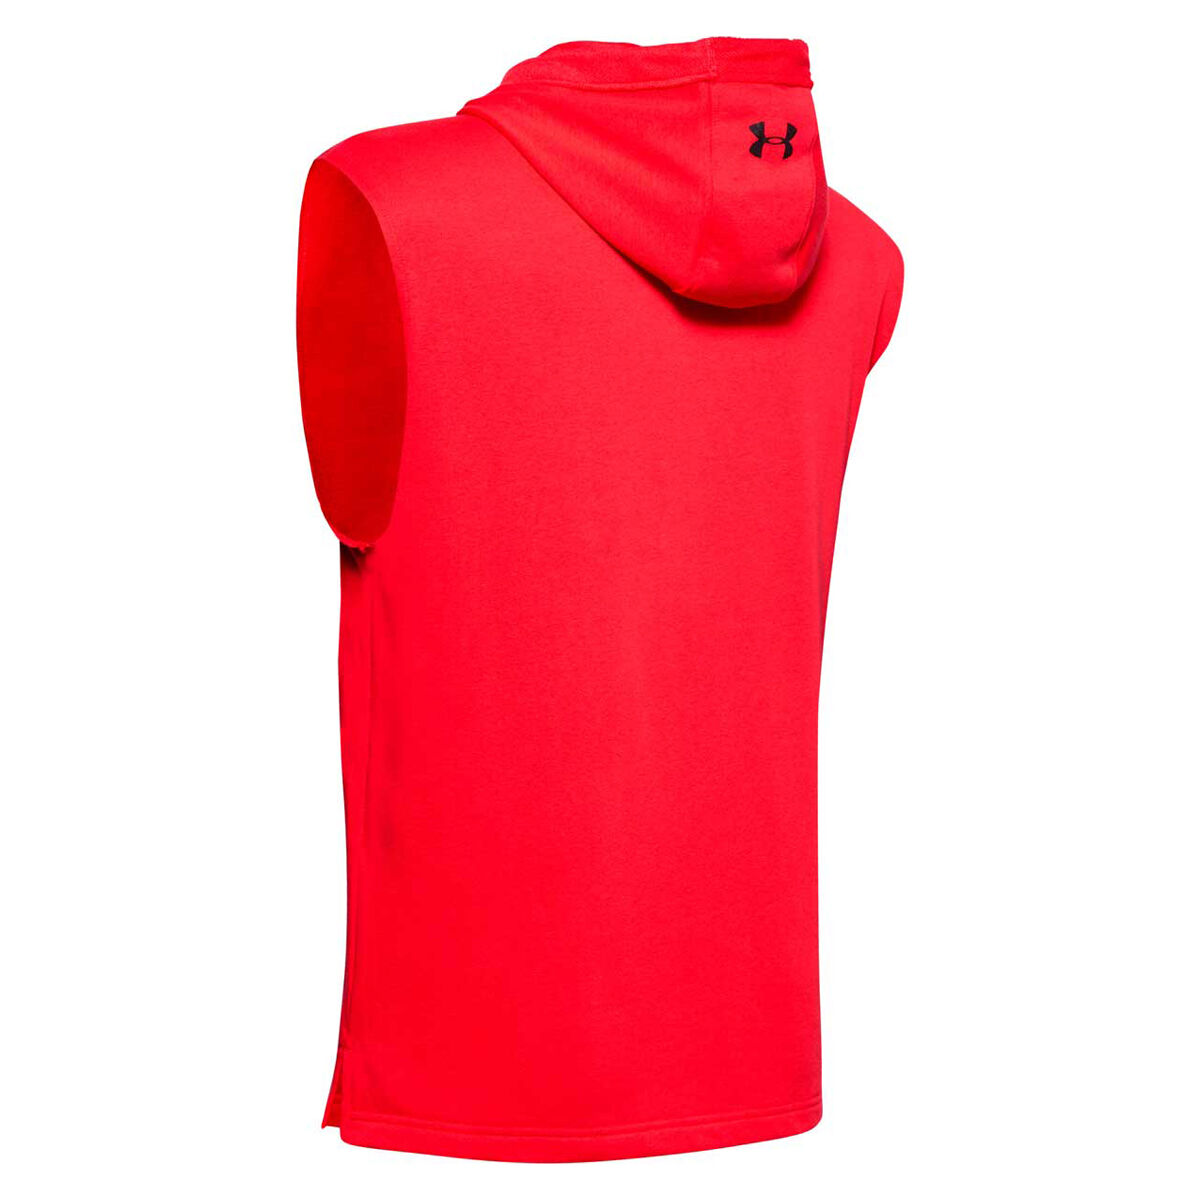 under armour hoodie red